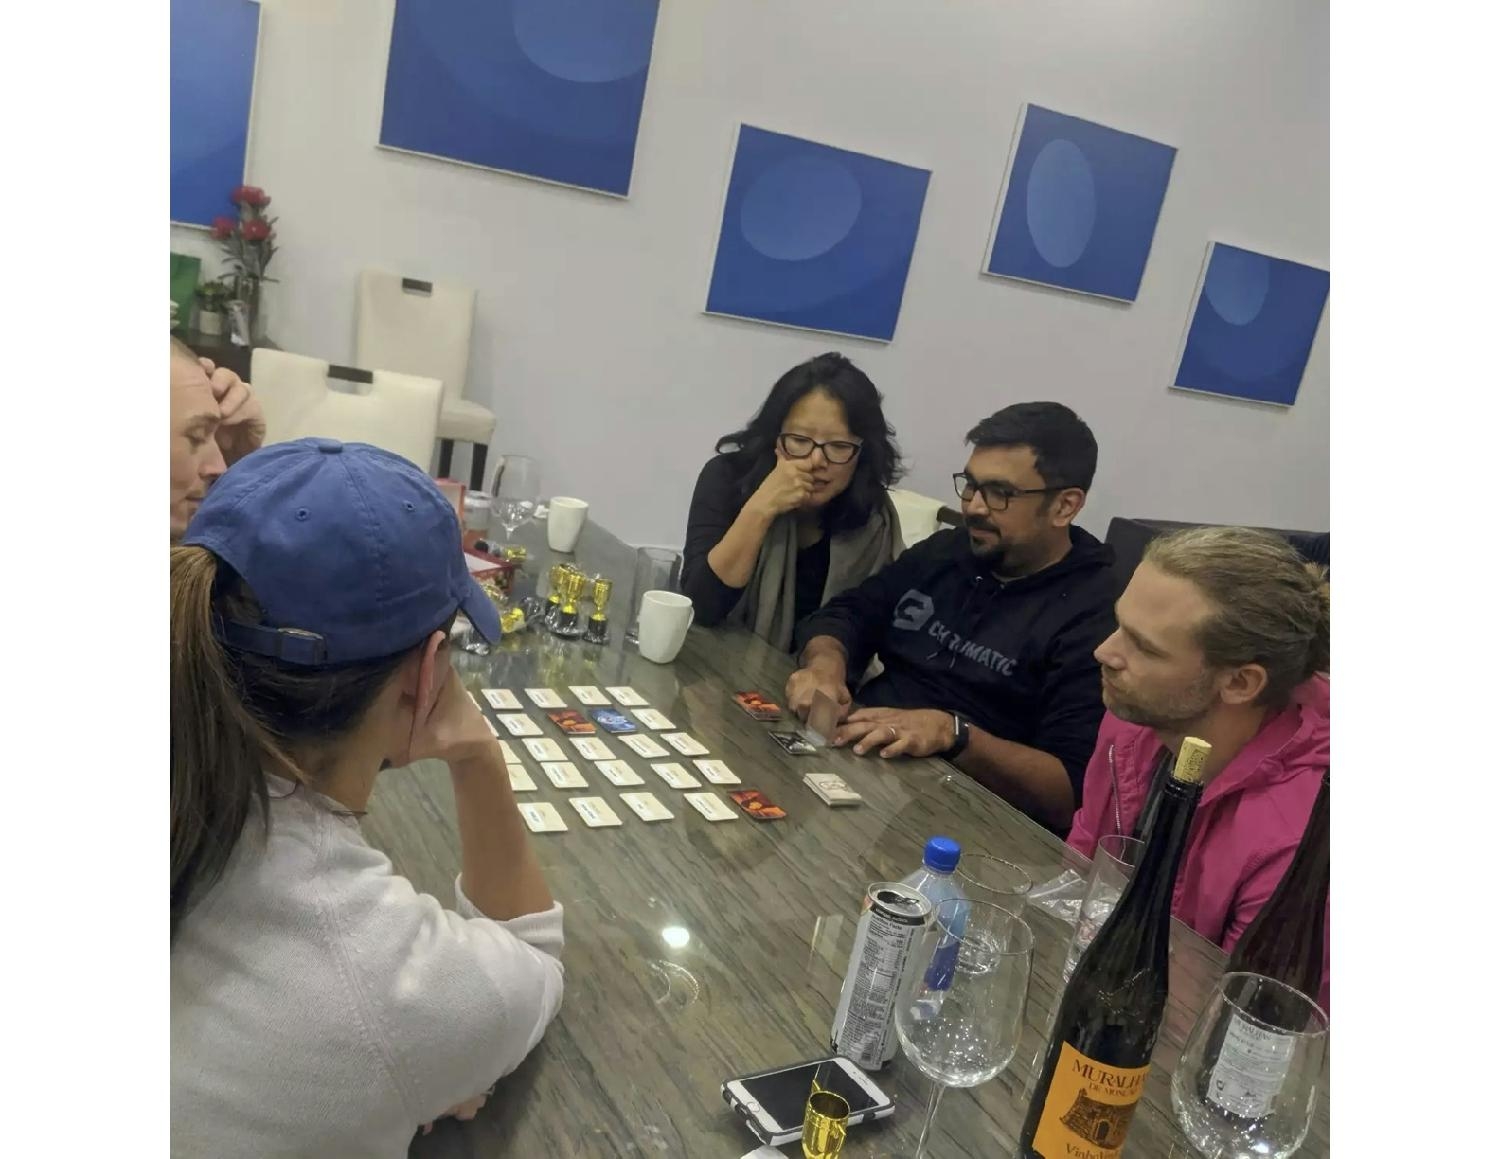 A rousing game night for the Chromatic team.